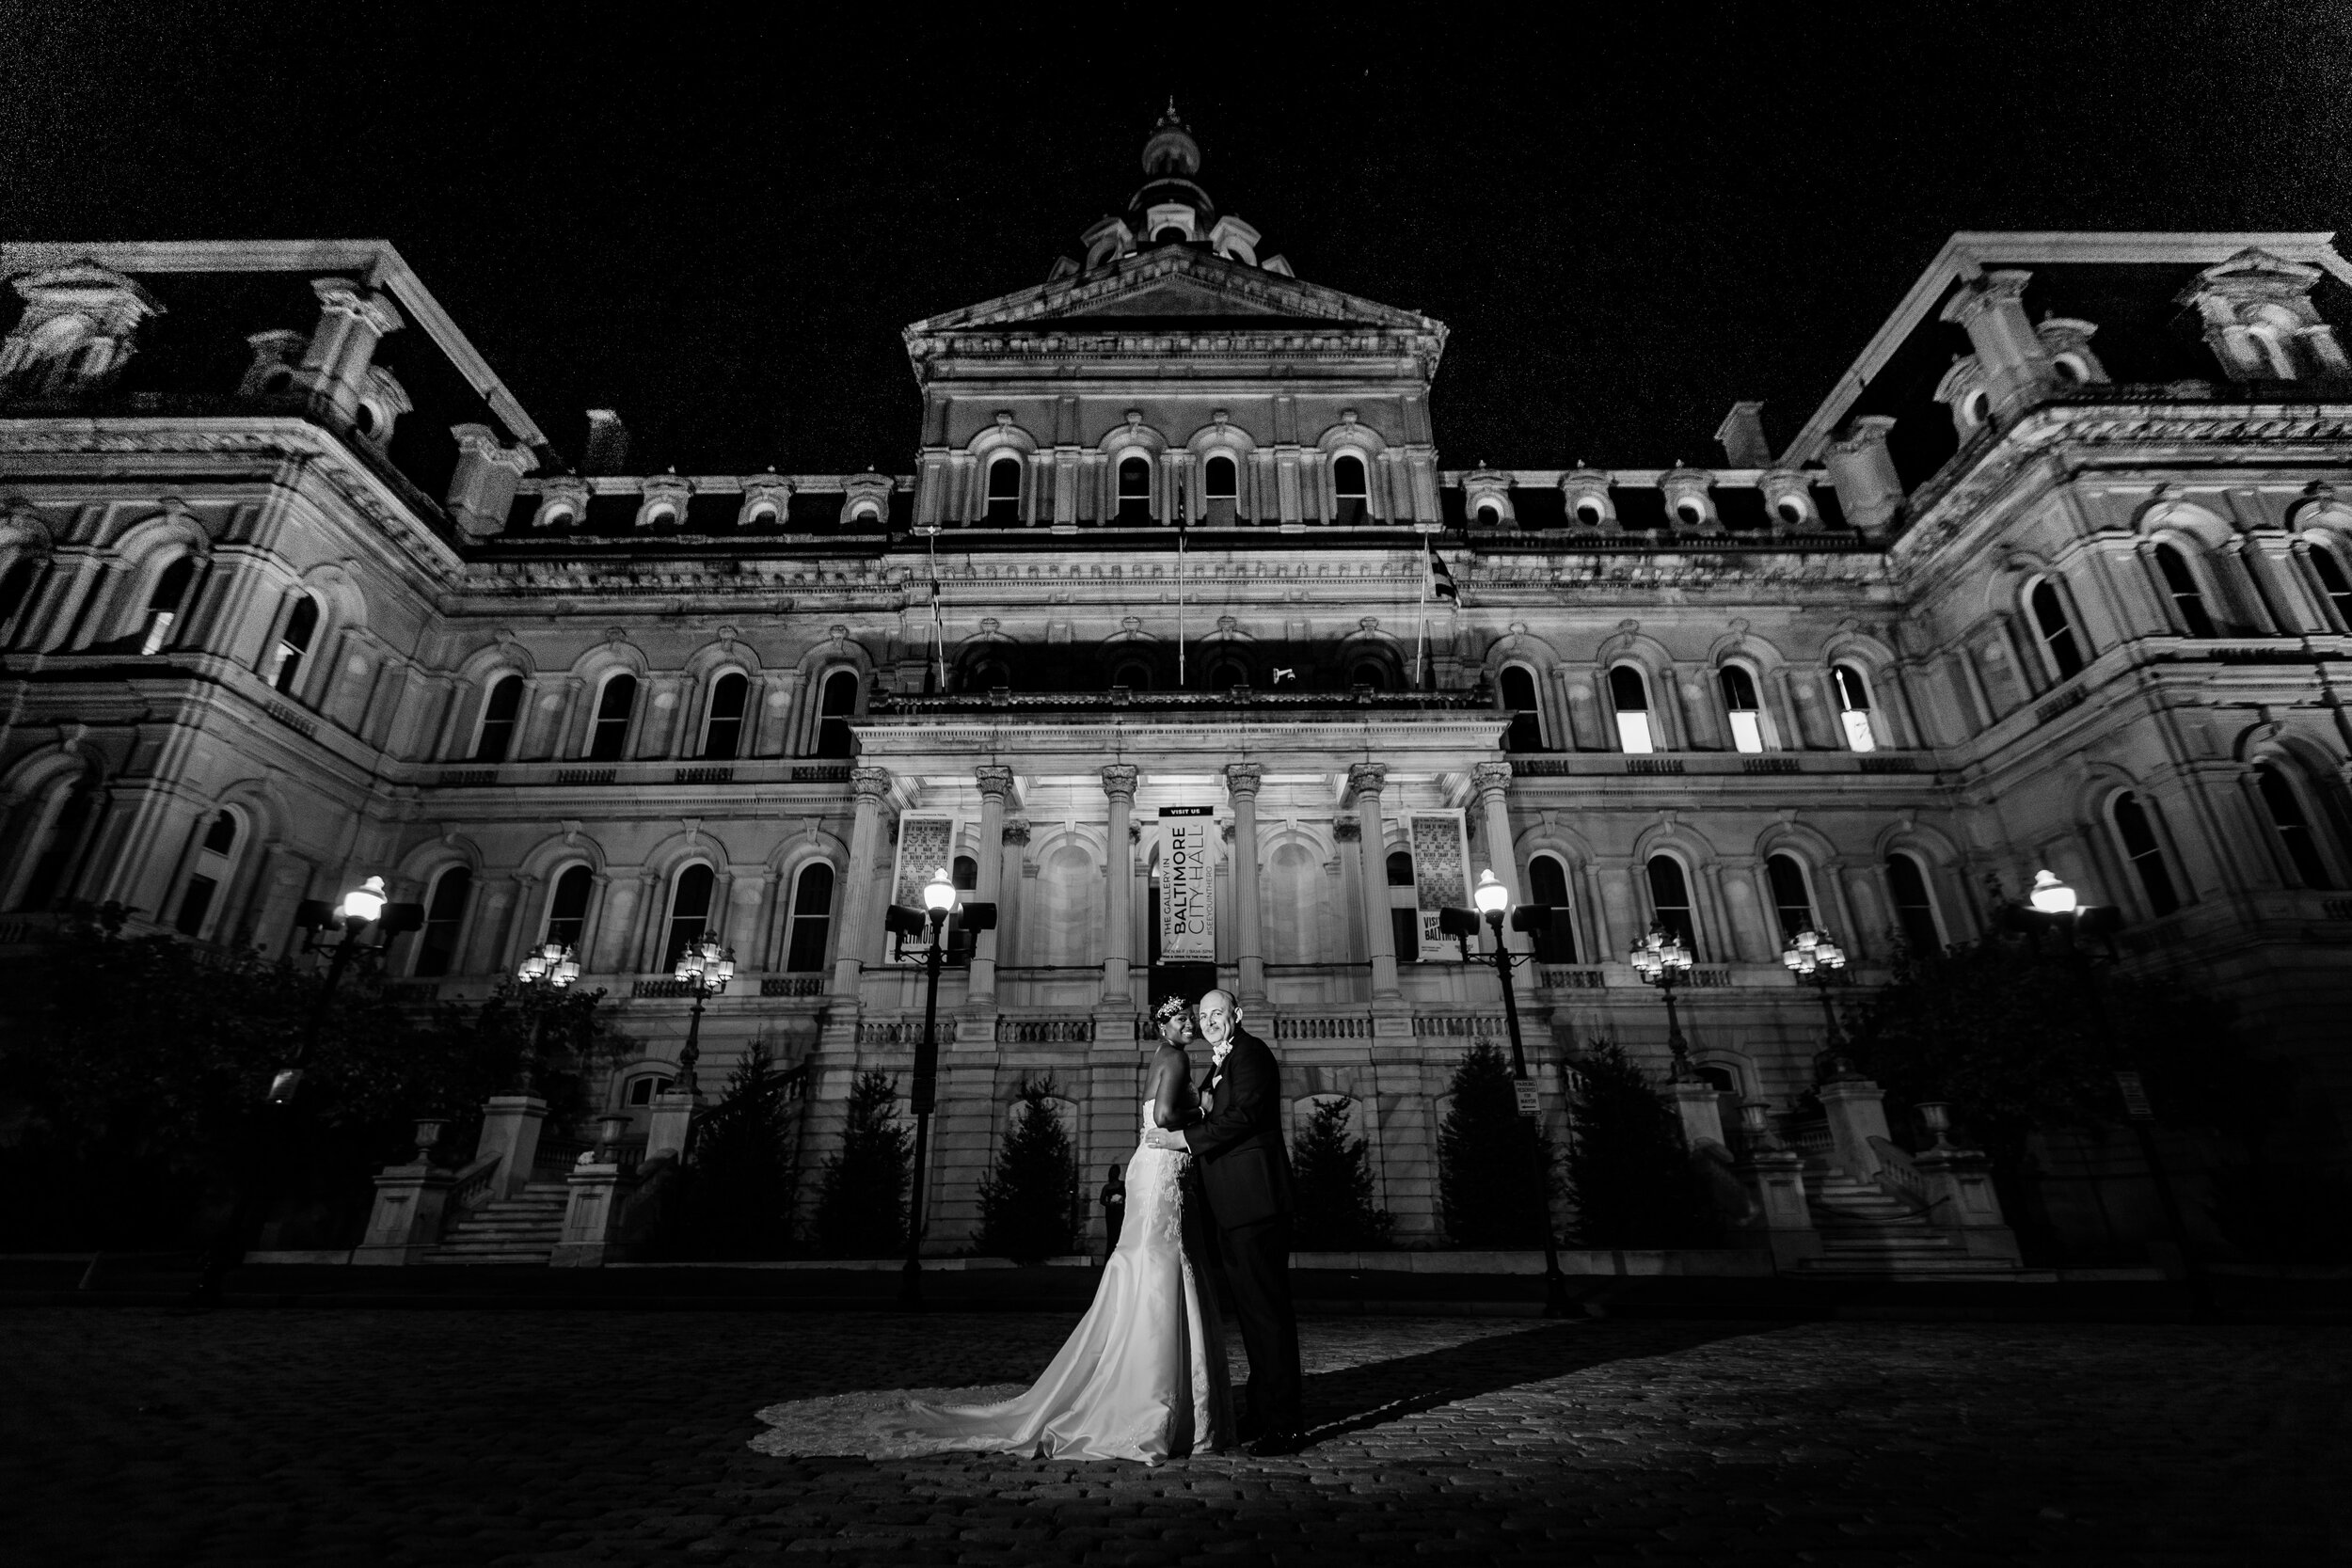 get married in baltimore city hall shot by megapixels media biracial couple wedding photographers maryland-96.jpg